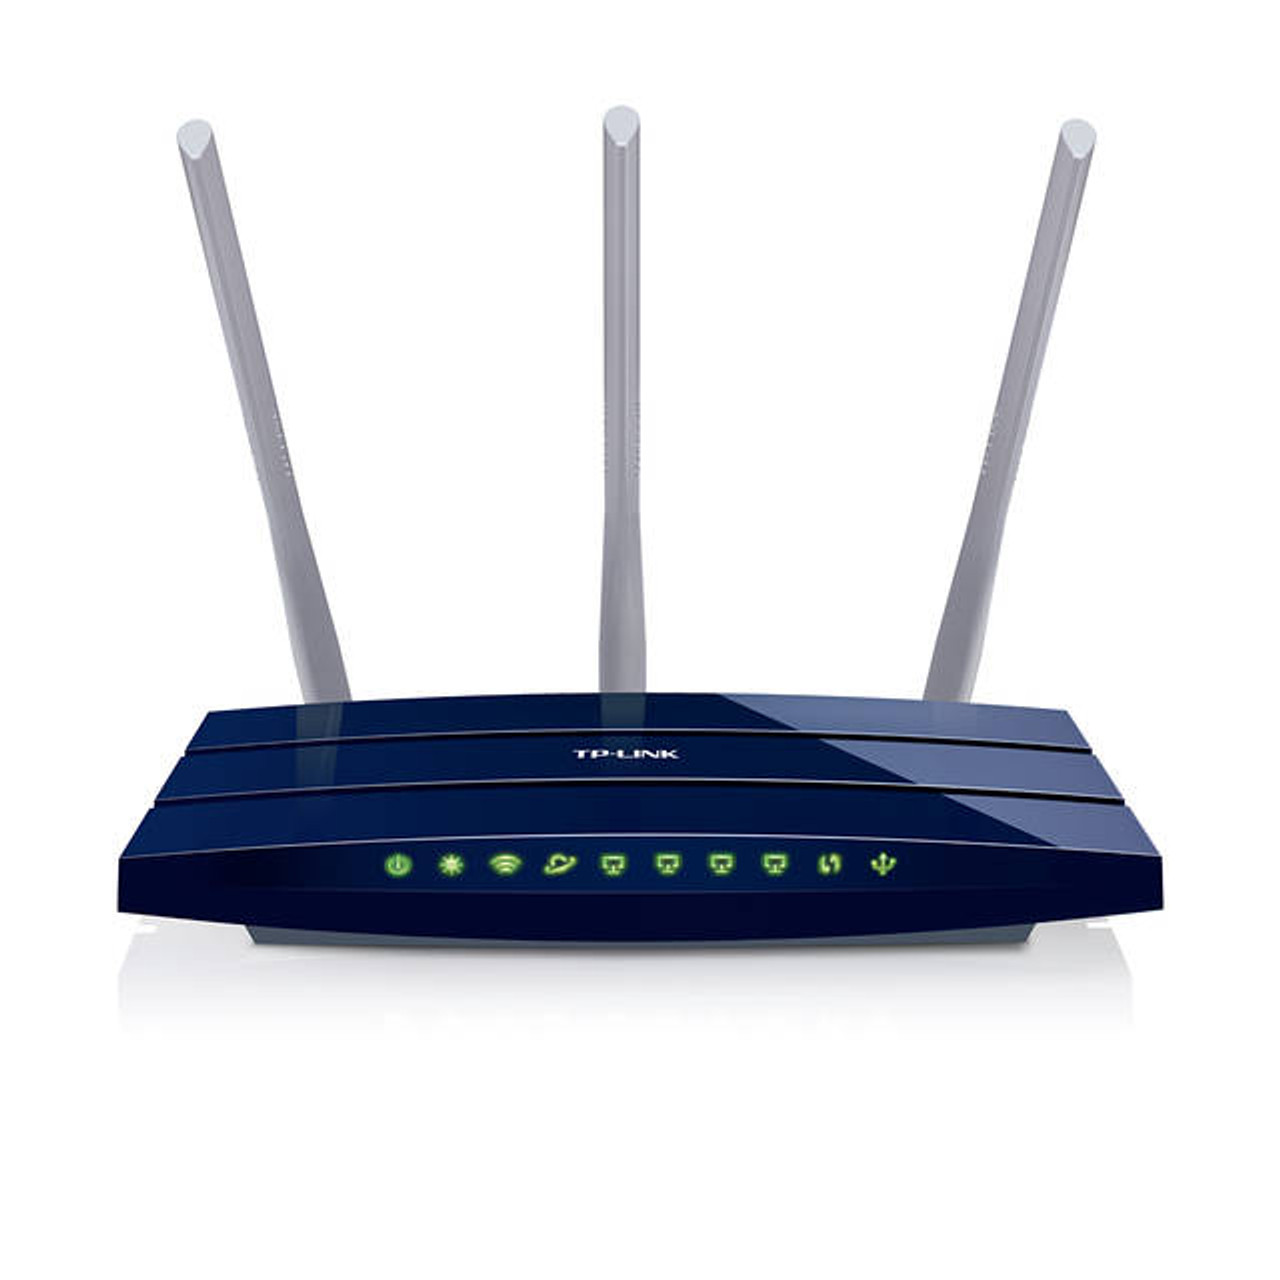 TP-Link TL-WR1043ND 300Mbps Wireless N Gigabit Router w/ 3x 5dBi Antennas